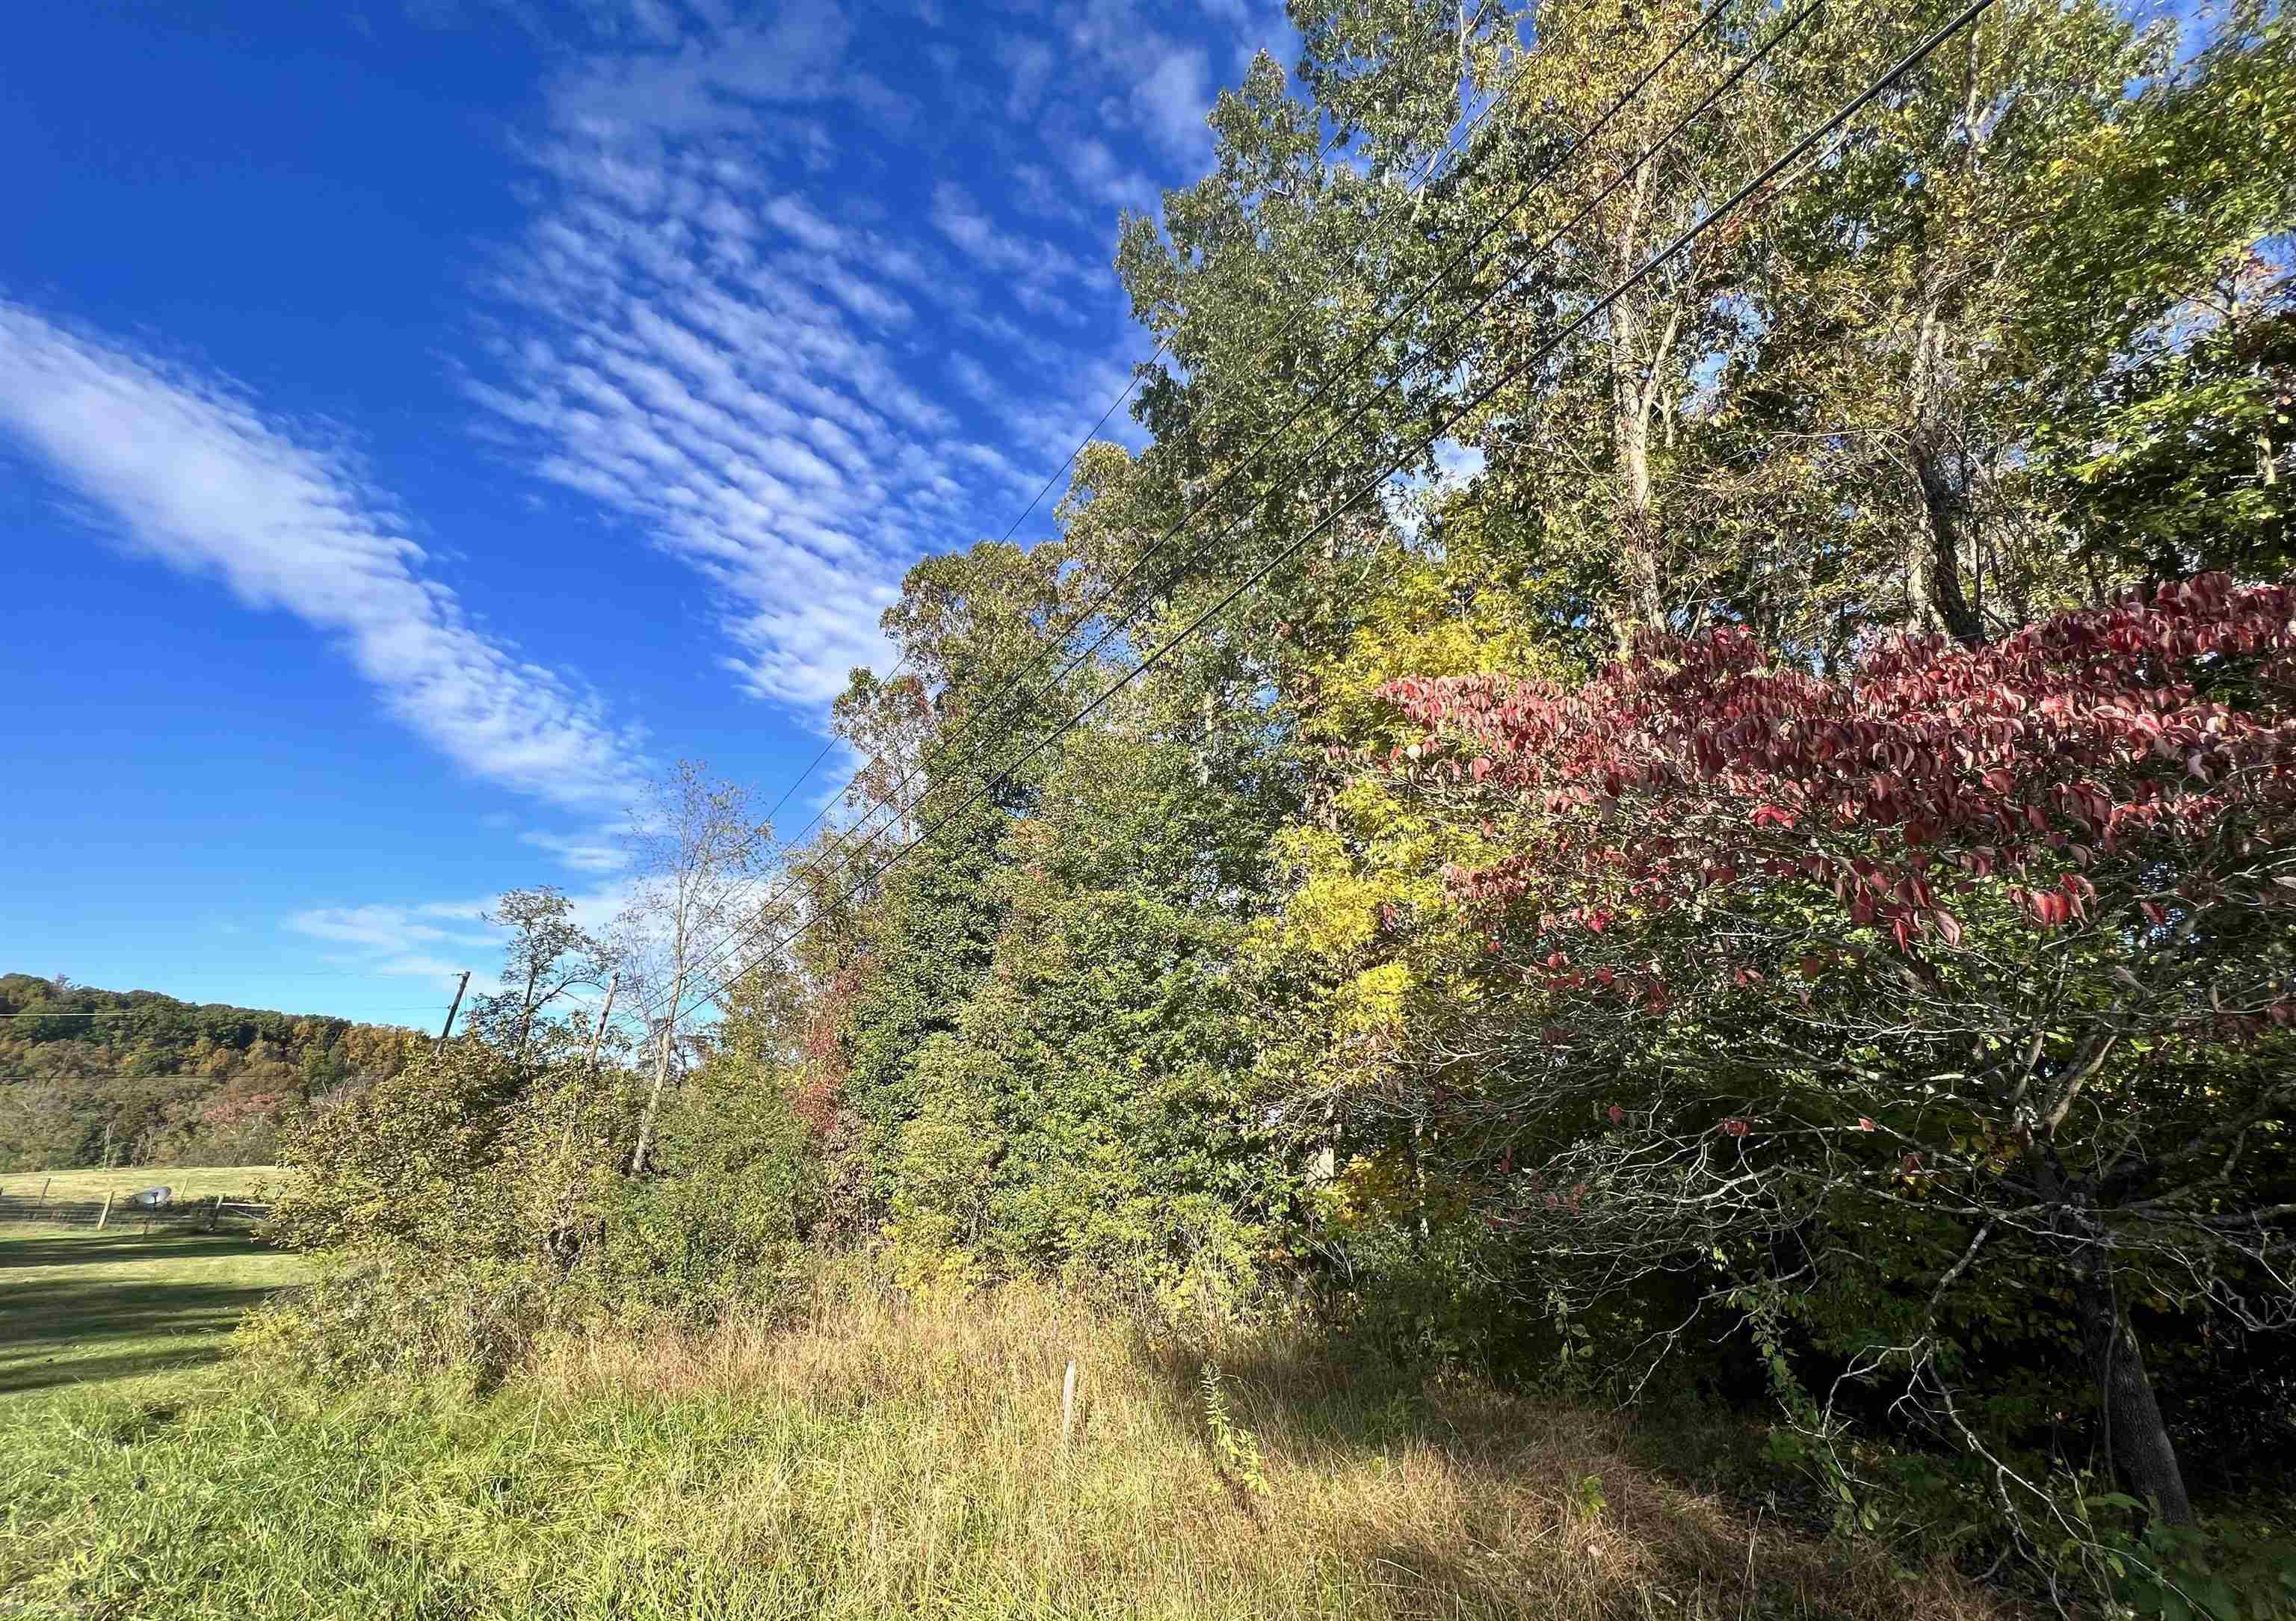 Looking for a convenient location to build, but want privacy and mountain views? This lot fits both! With just over an acre of space, you have unlimited options to build your dream home. This mostly wooded lot offers privacy, shade and great curb appeal!